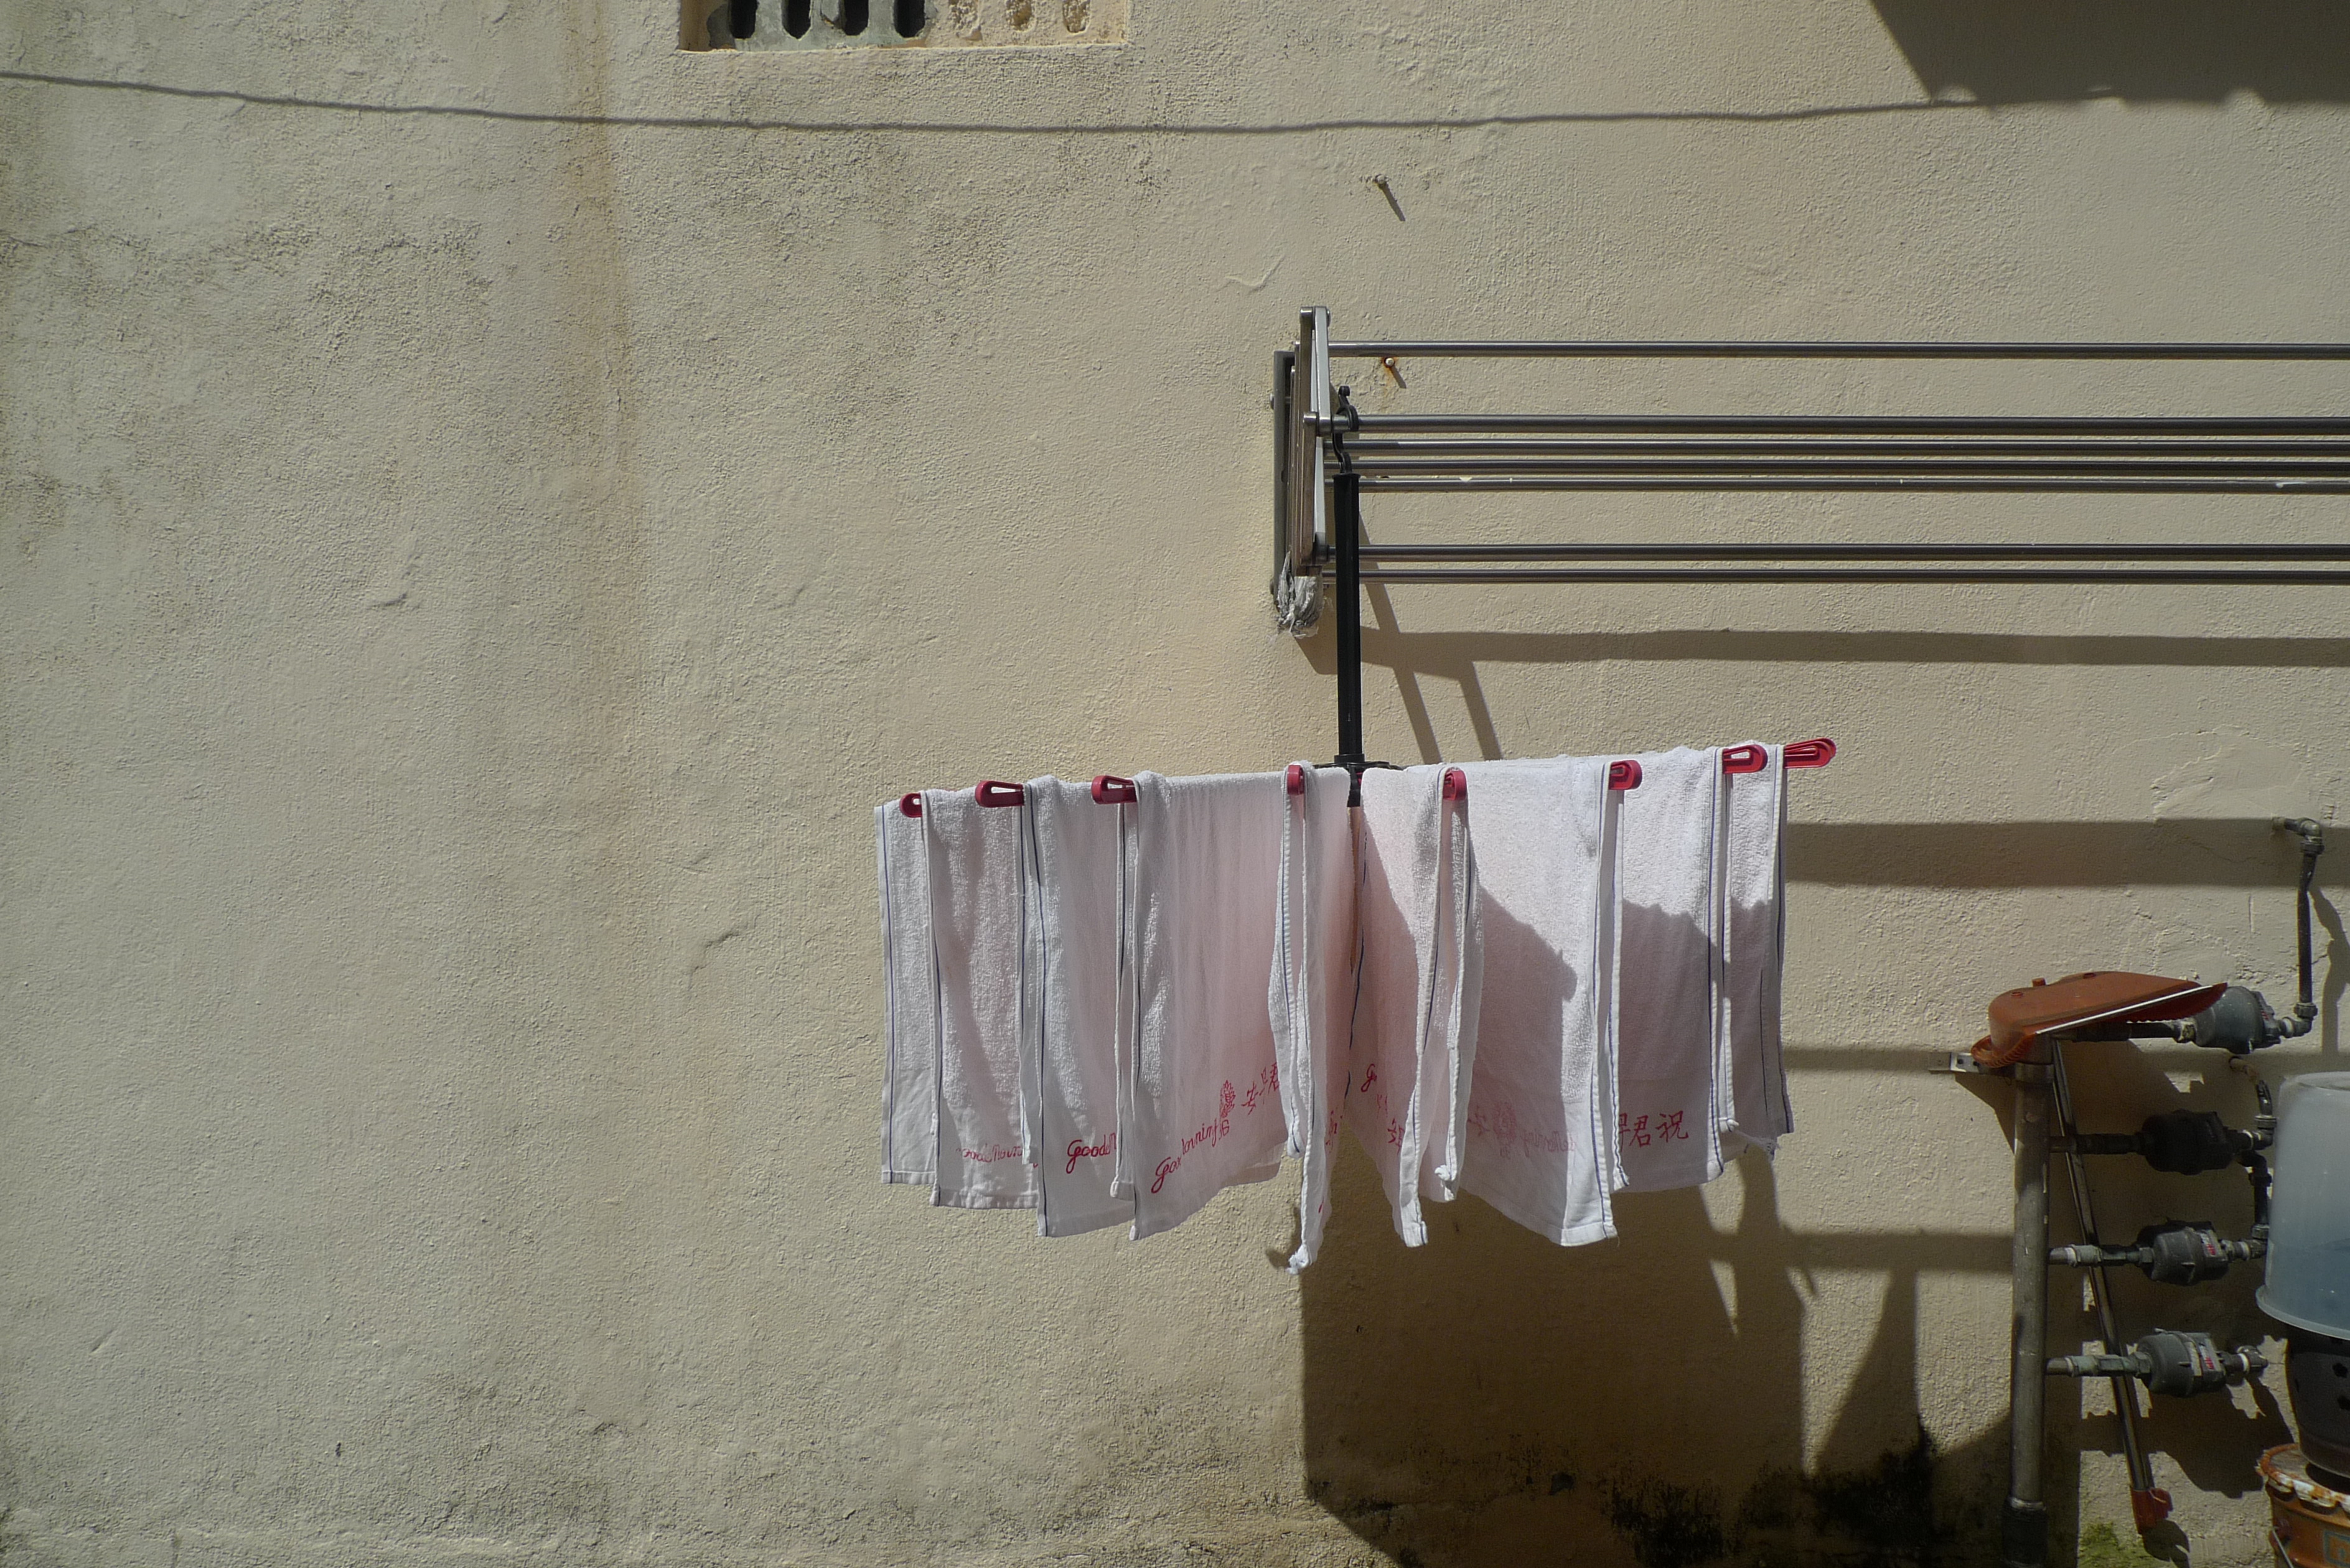 A clothes hanger number of Good Morning brand towels--white towels with Chinese print in red and script that says Good Morning, symmetrically placed, looking like a wide open flower, in a backstreet in Jalan Besar district, Singapore